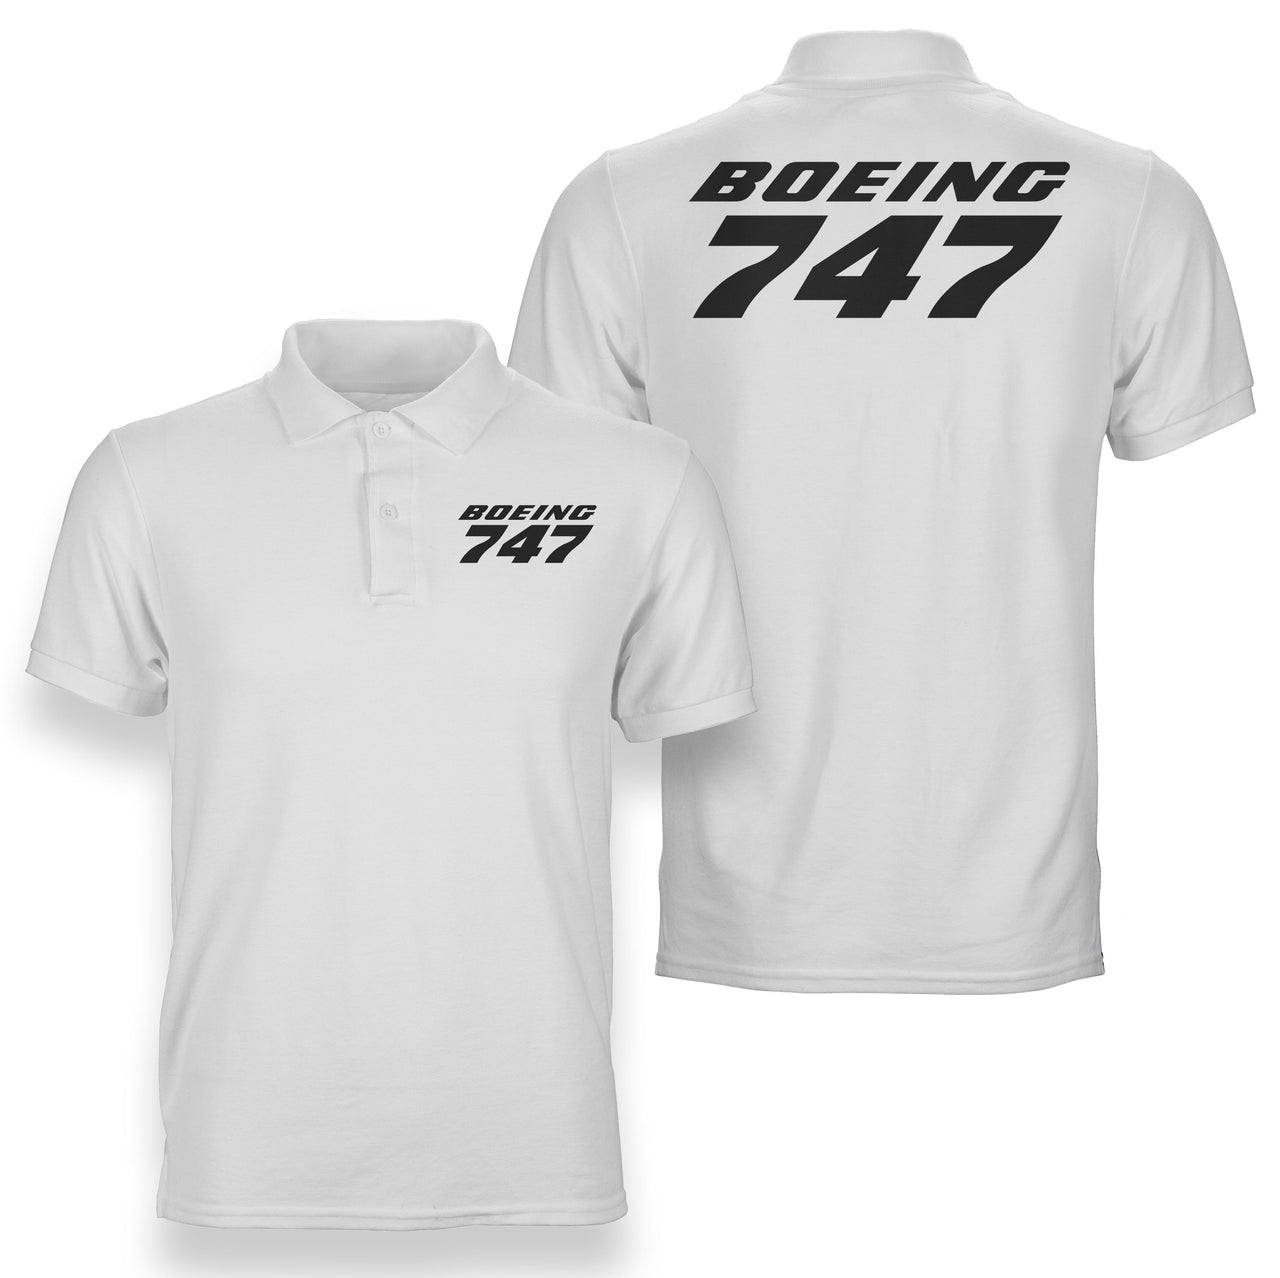 Boeing 747 & Text Designed Double Side Polo T-Shirts